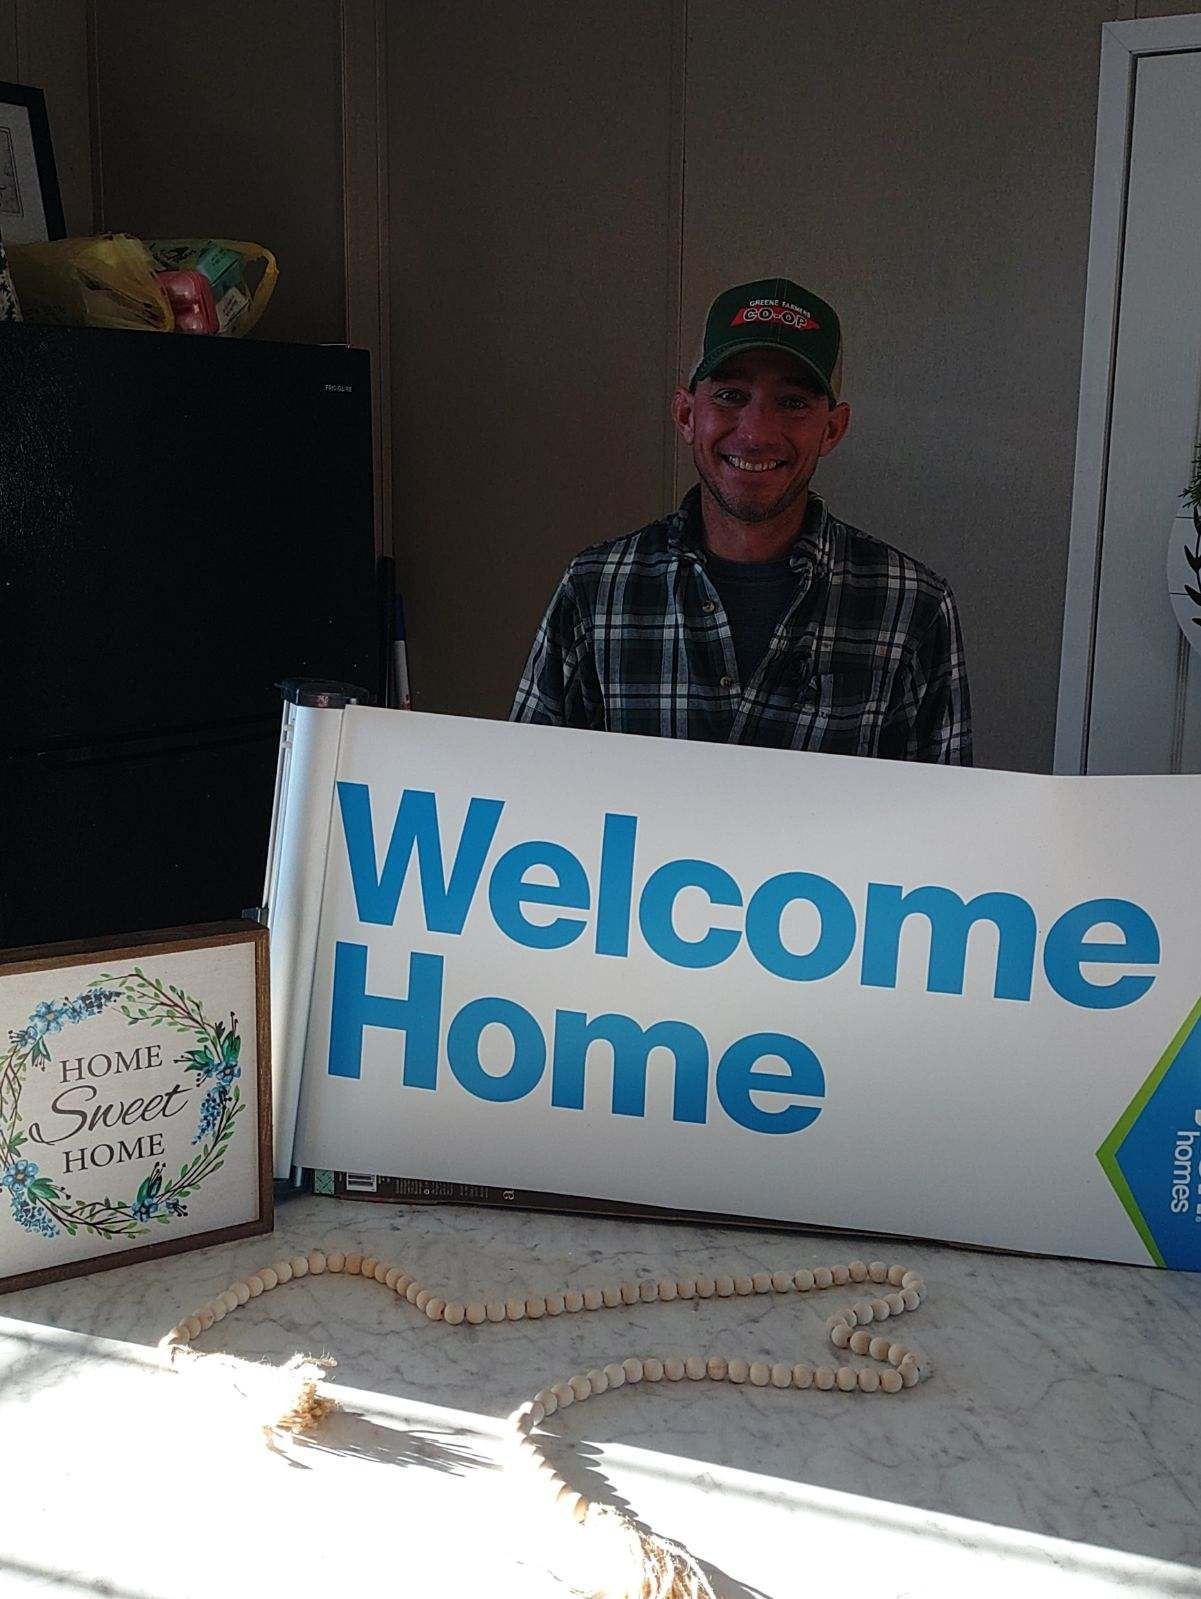 JEREMY W. welcome home image